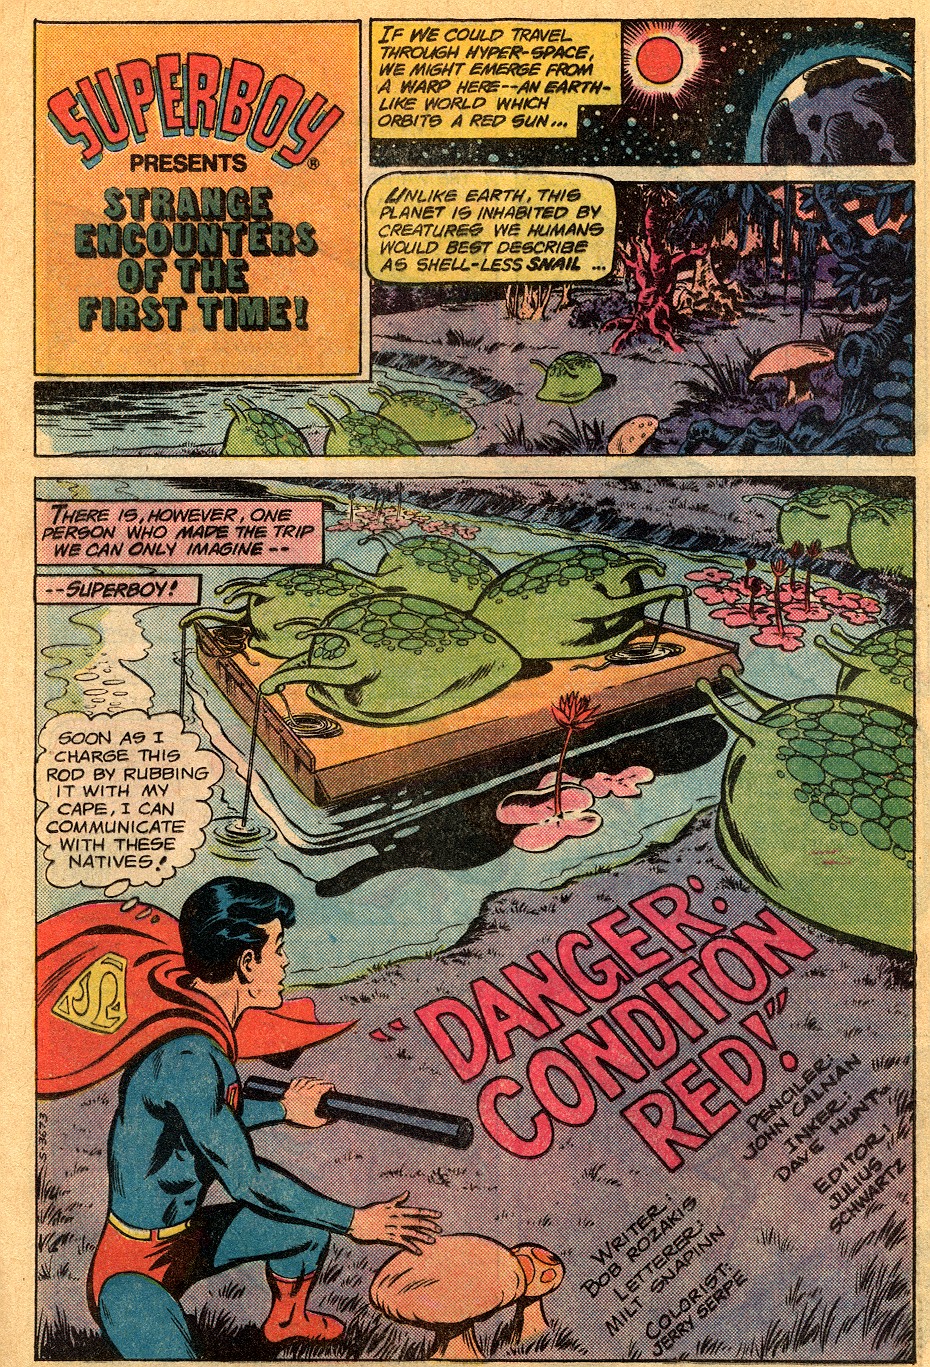 The New Adventures of Superboy 21 Page 24